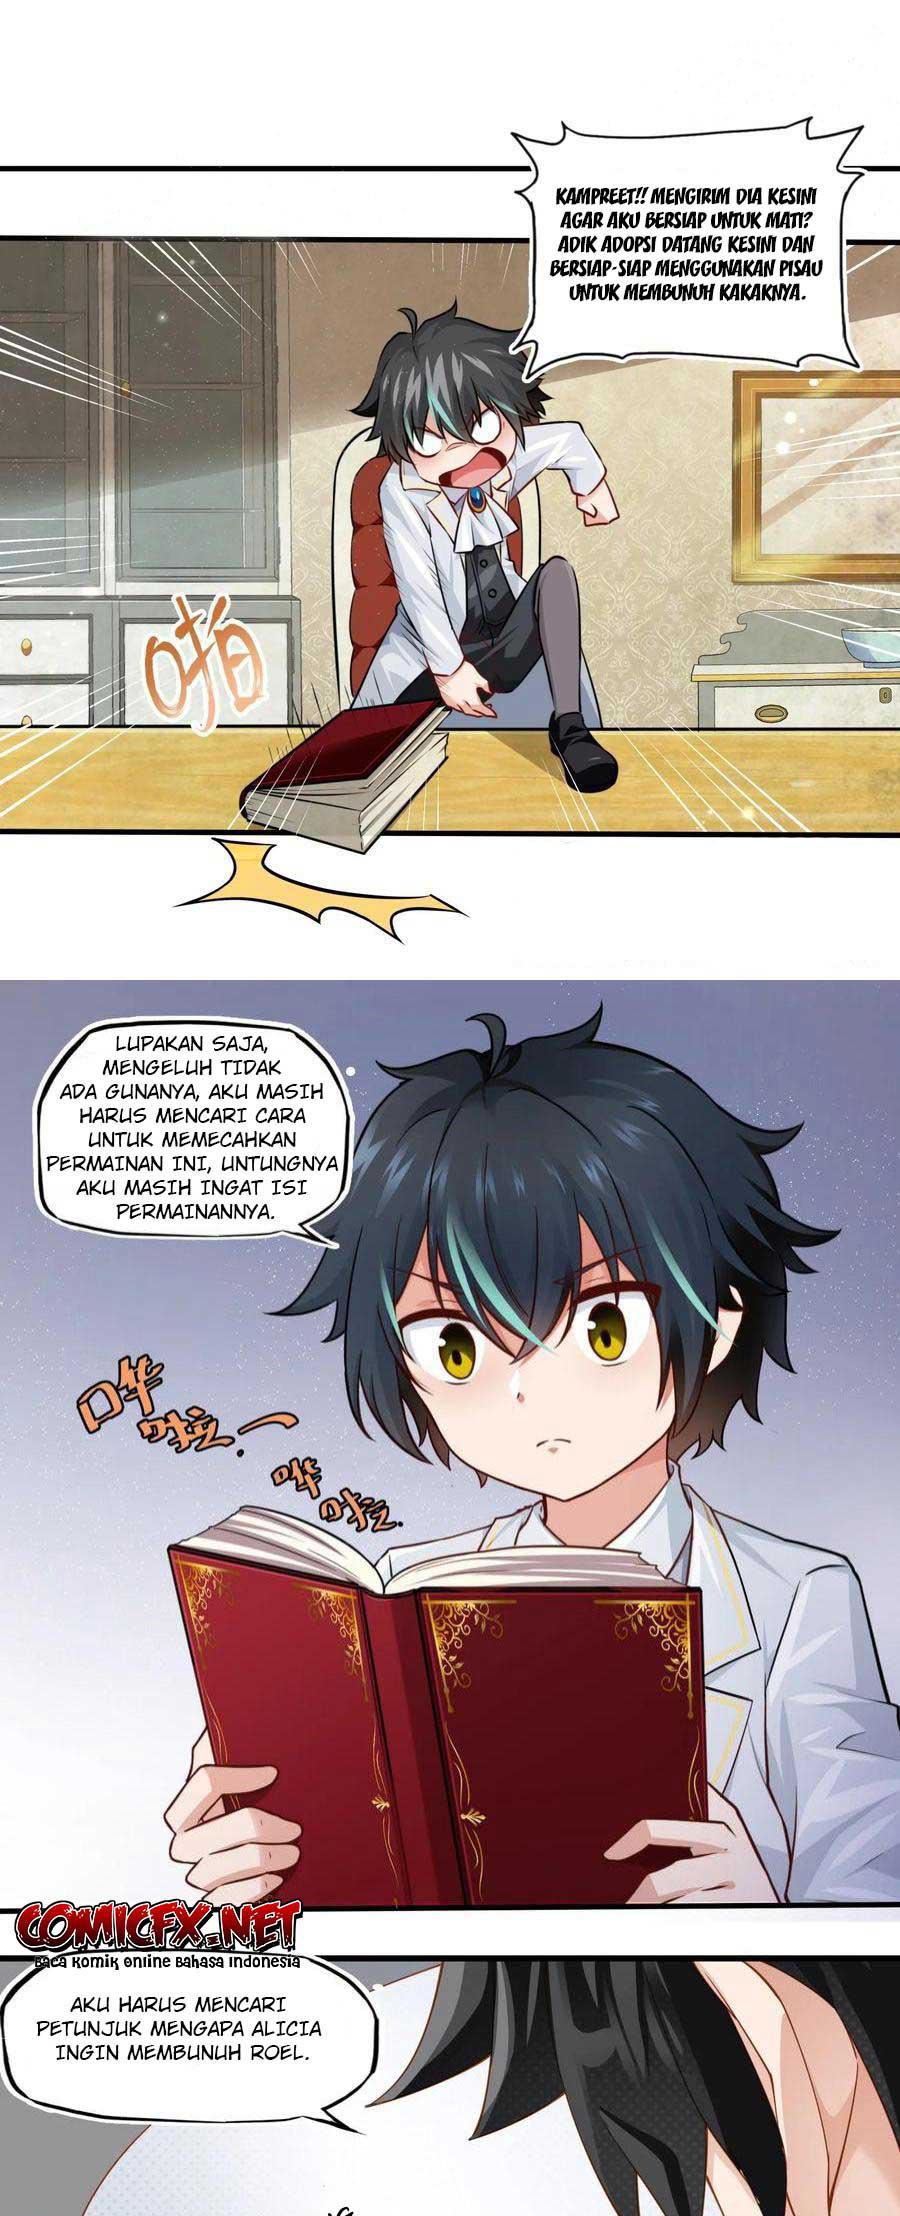 Dilarang COPAS - situs resmi www.mangacanblog.com - Komik little tyrant doesnt want to meet with a bad end 001 - chapter 1 2 Indonesia little tyrant doesnt want to meet with a bad end 001 - chapter 1 Terbaru 7|Baca Manga Komik Indonesia|Mangacan